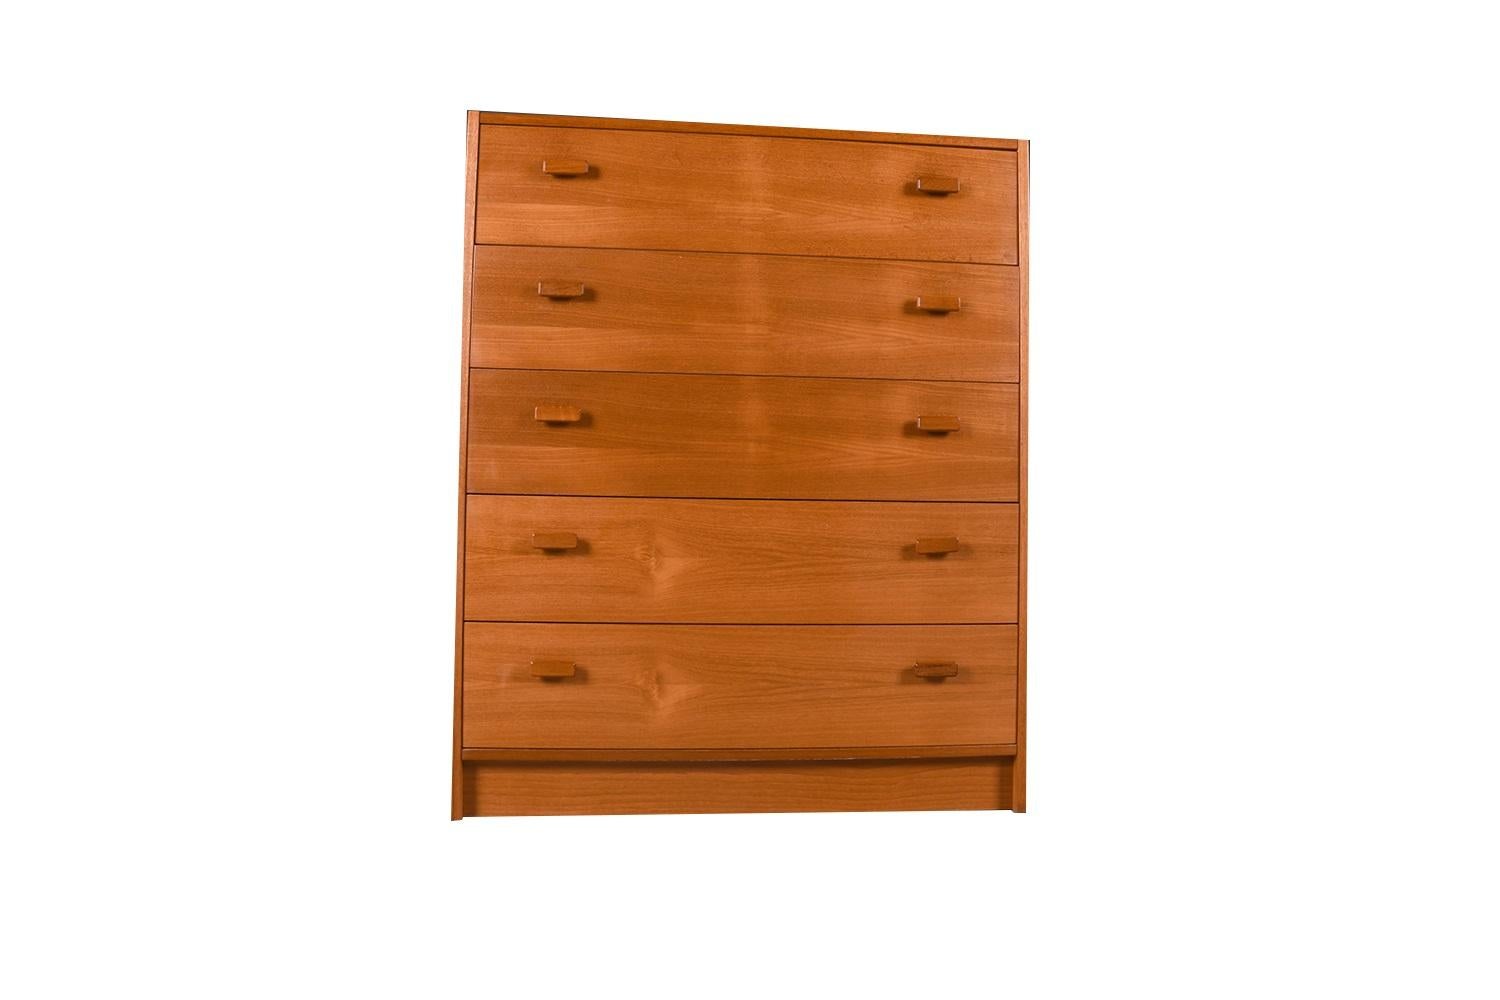 Mid-Century Modern teak high boy dresser, chest of drawers, made in Denmark. Minimalist Danish Modern inspired profile and extremely well-made dresser, has incredible lines and detailing. Stunning teak grain high boy dresser accented with sculpted